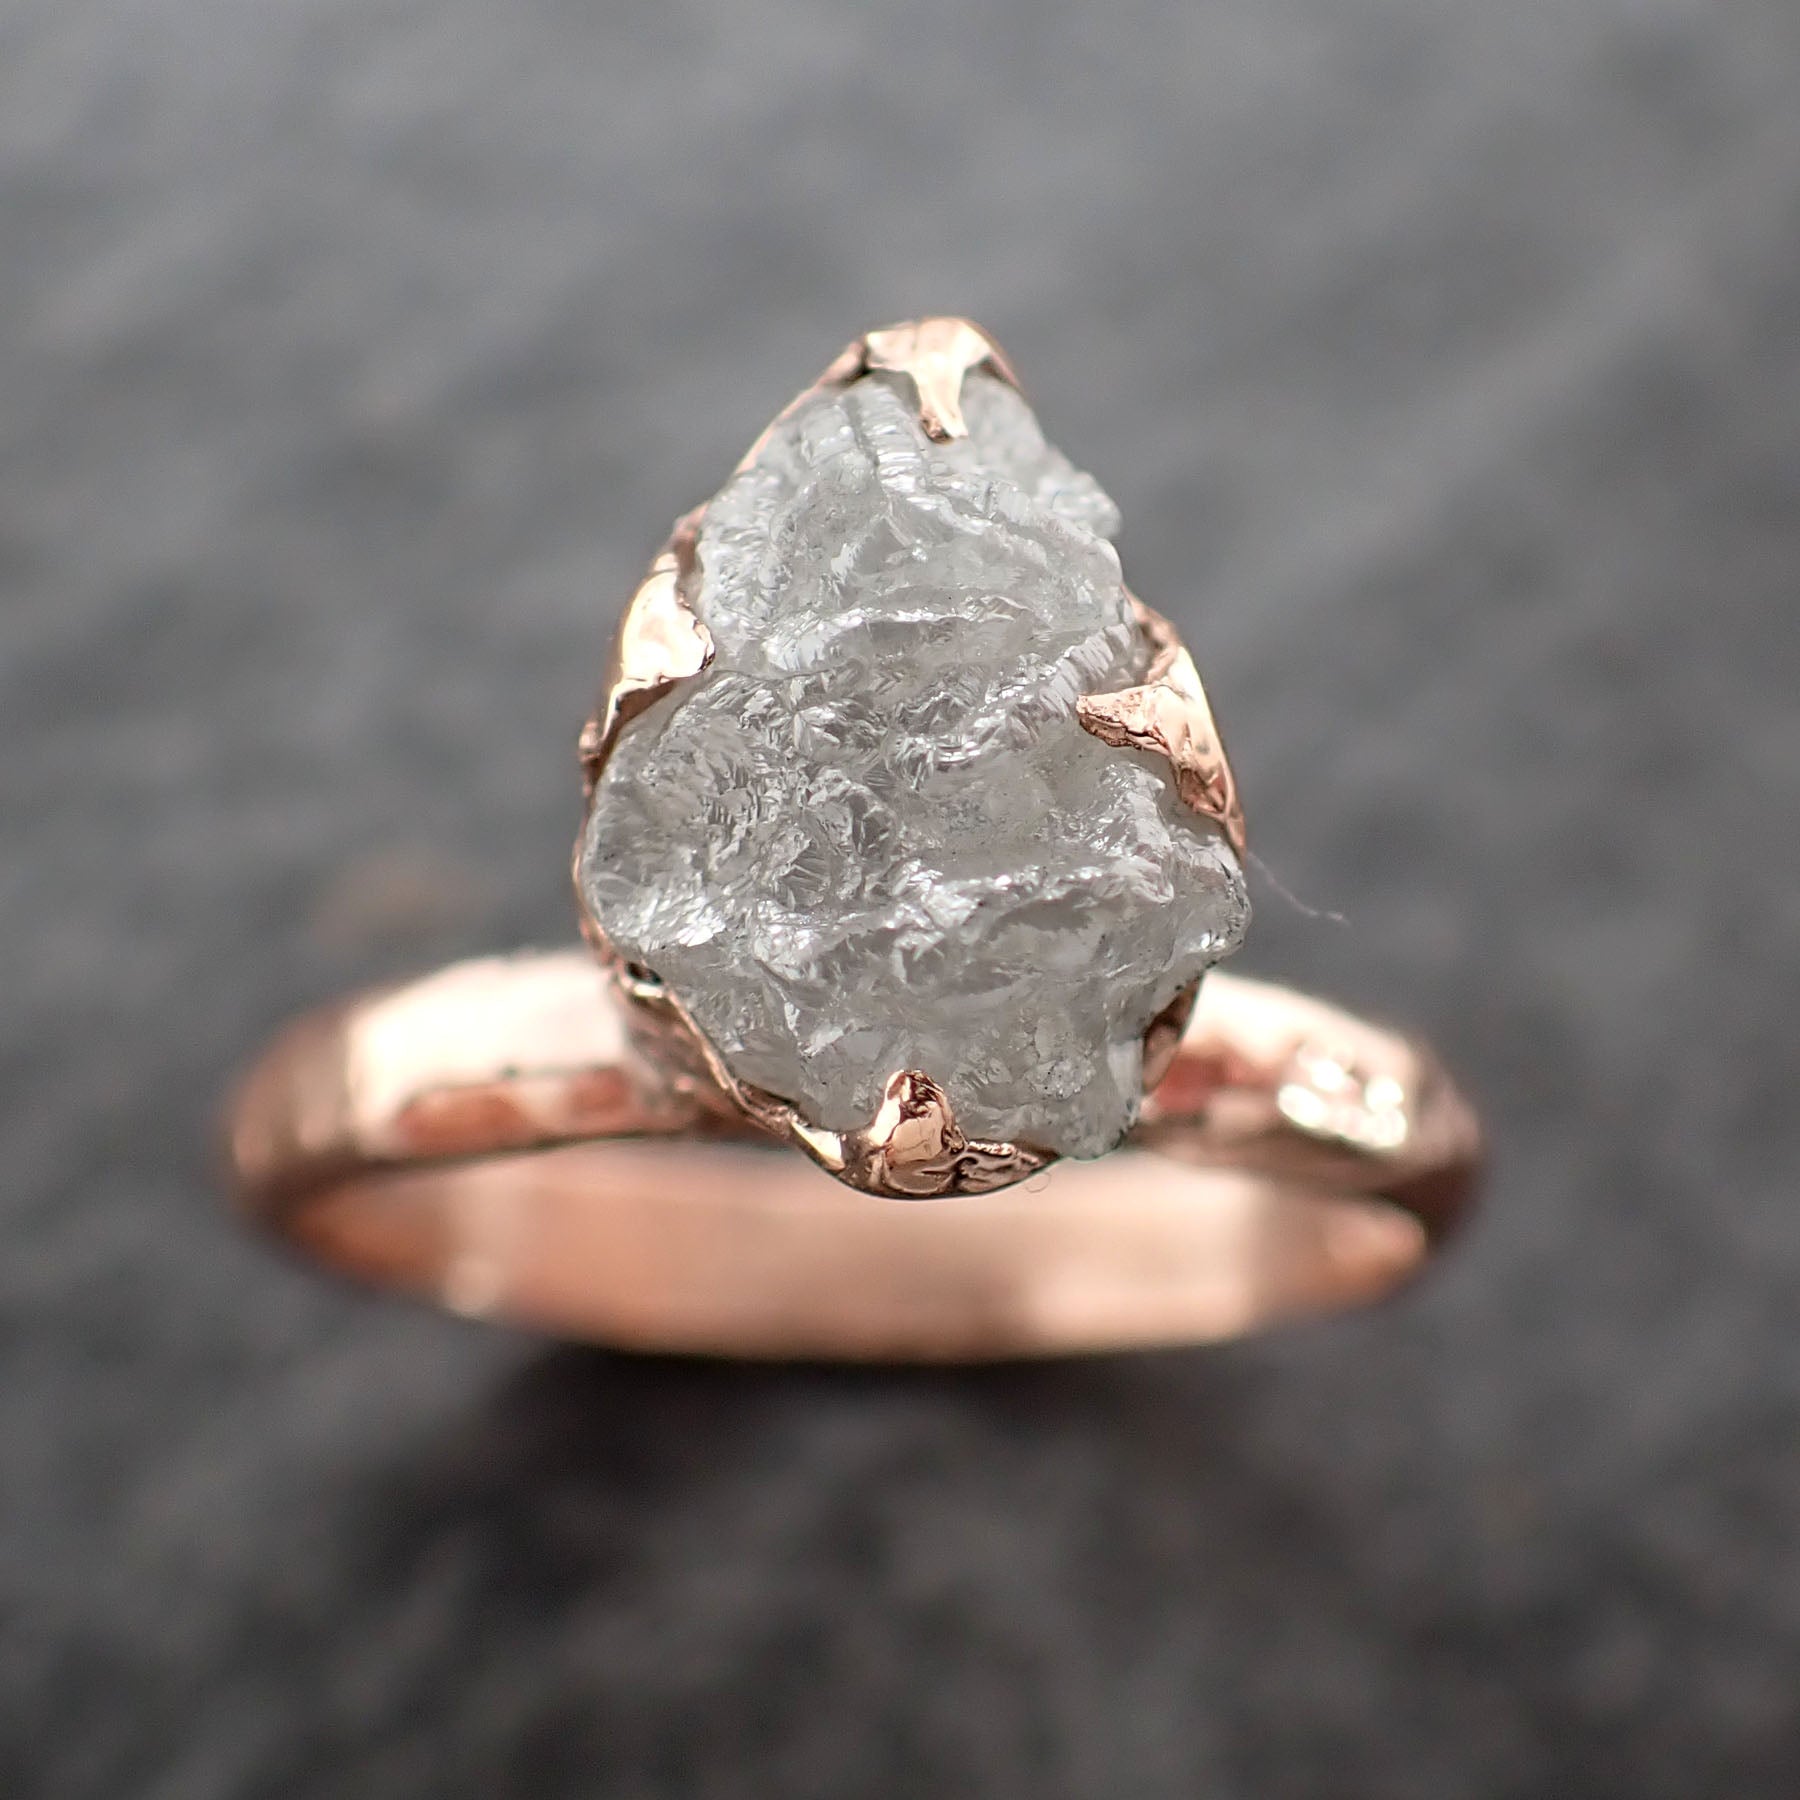 raw diamond solitaire engagement ring rough uncut rose gold conflict free diamond wedding promise 2541 Alternative Engagement